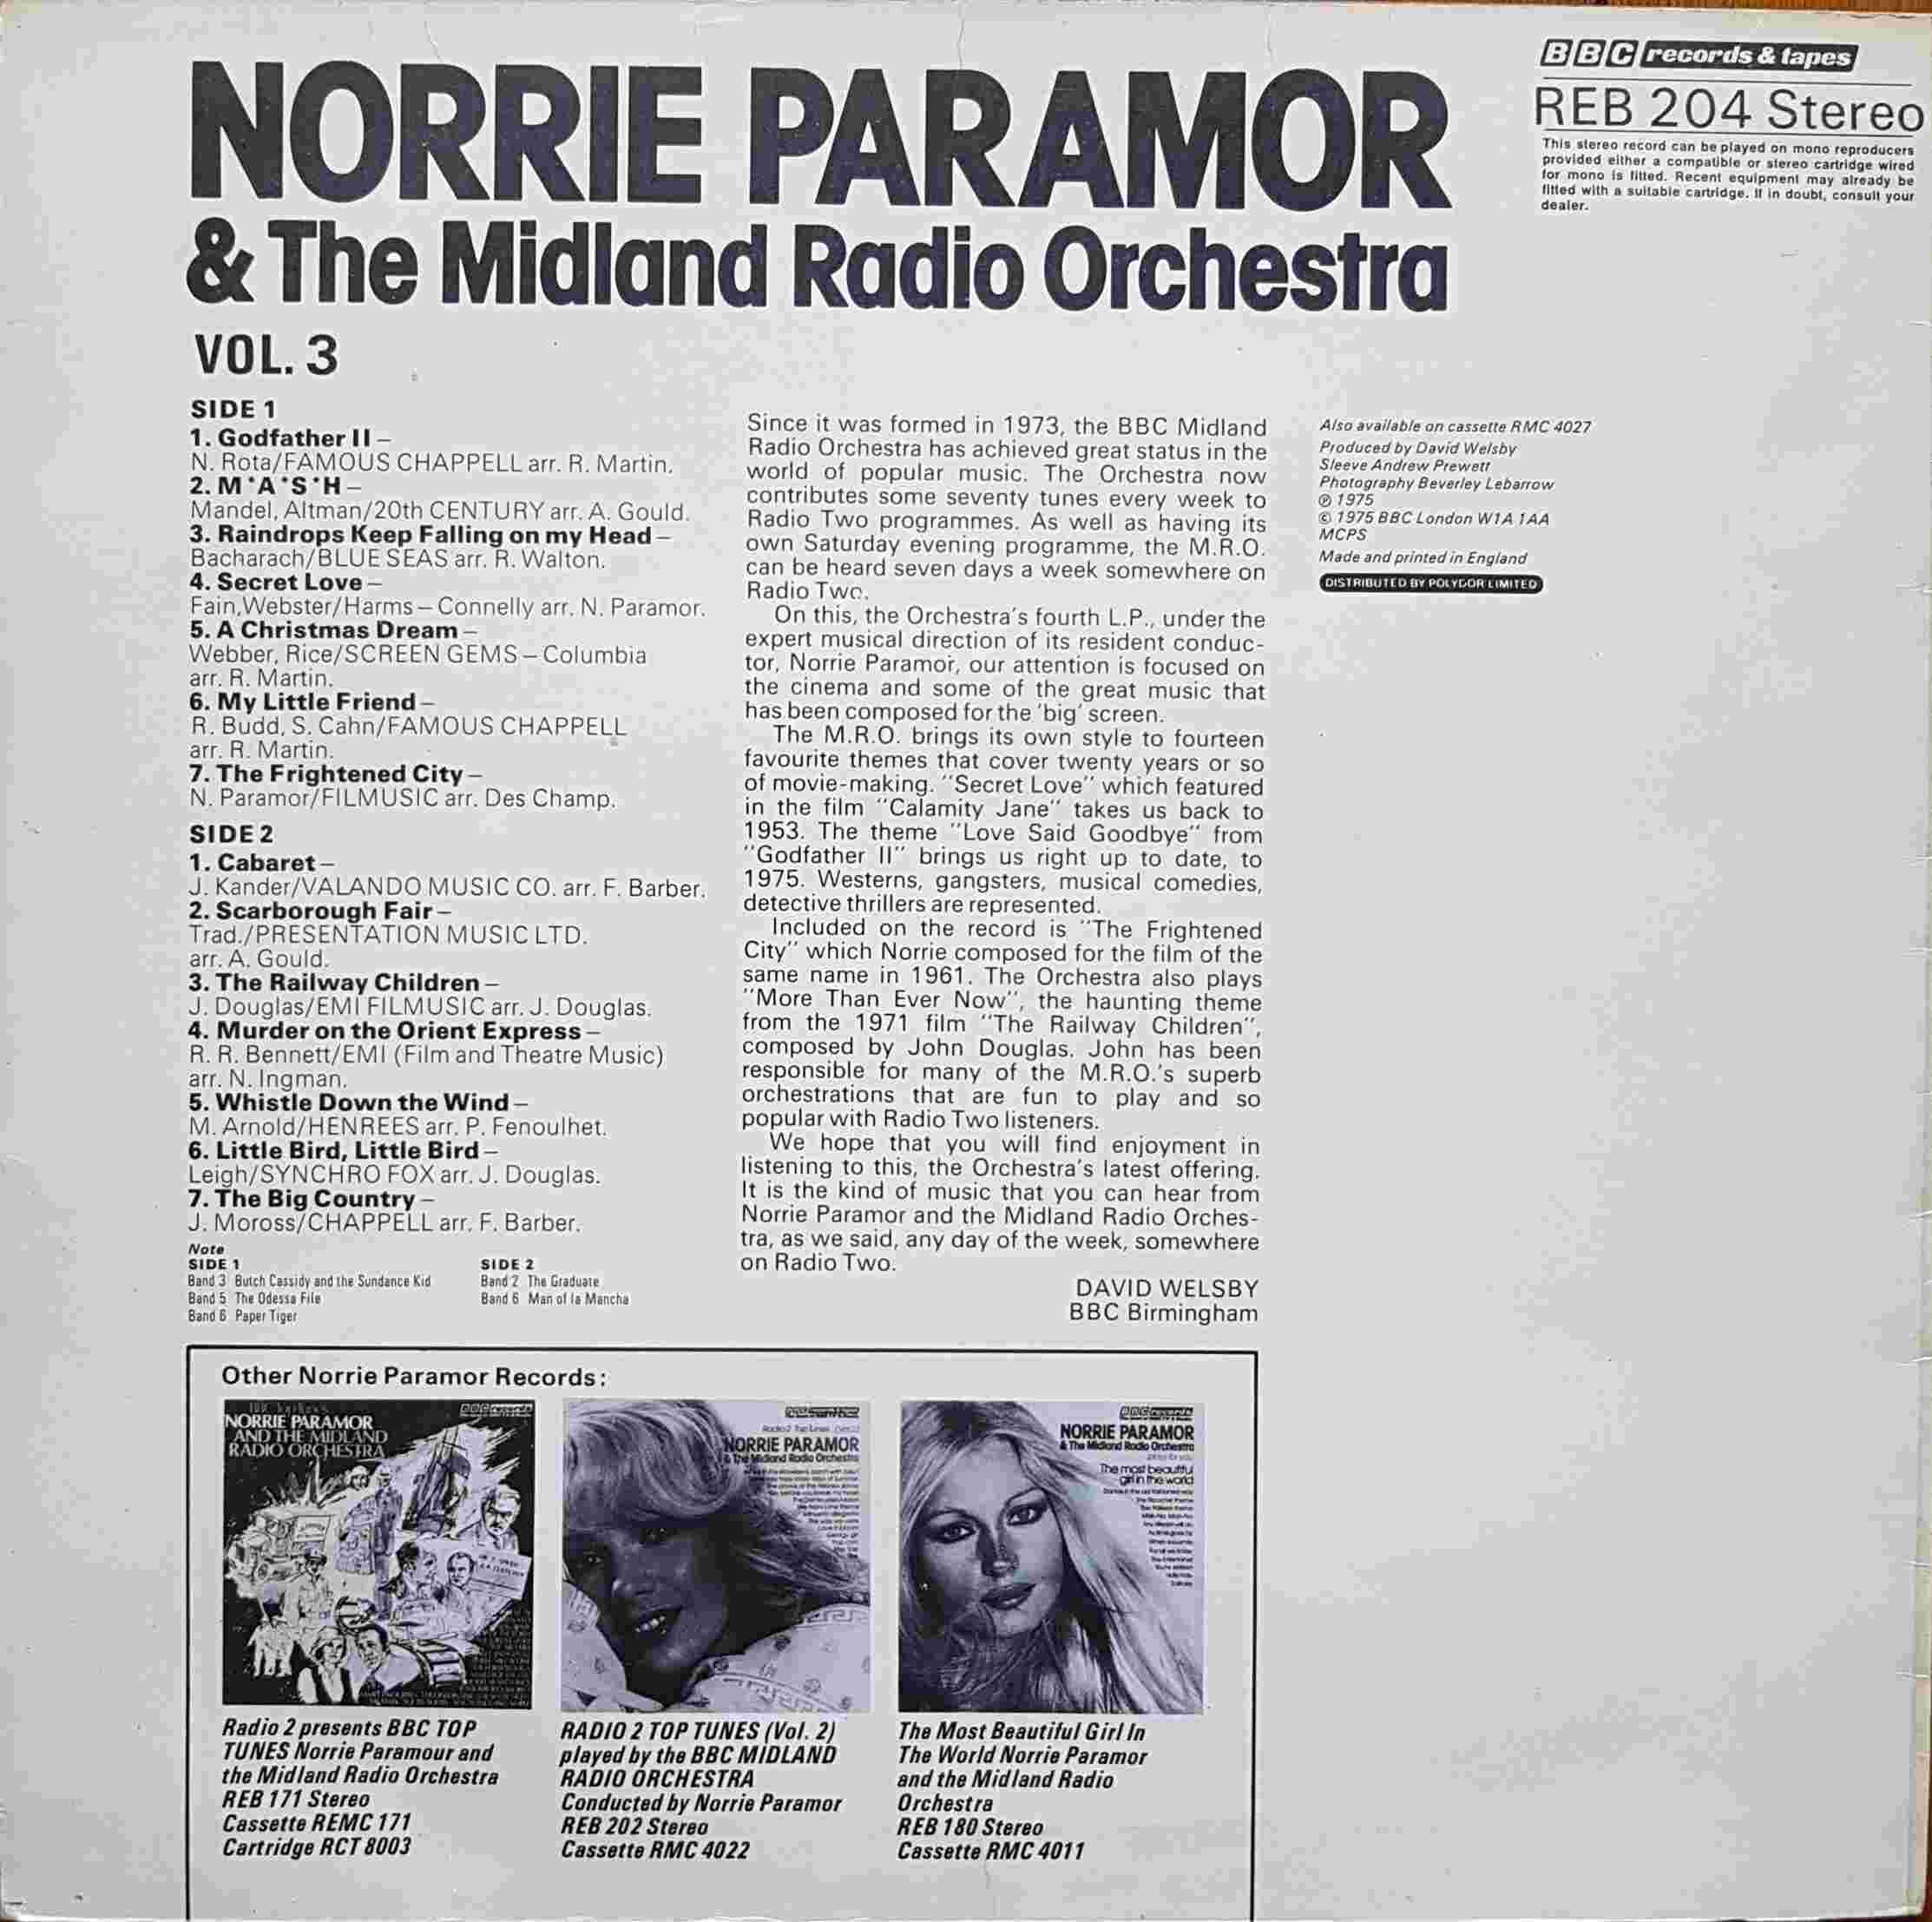 Picture of REB 204 Radio 2 top tunes - Volume 3 by artist Norrie Paramor and the Midland Radio Orchestra from the BBC records and Tapes library